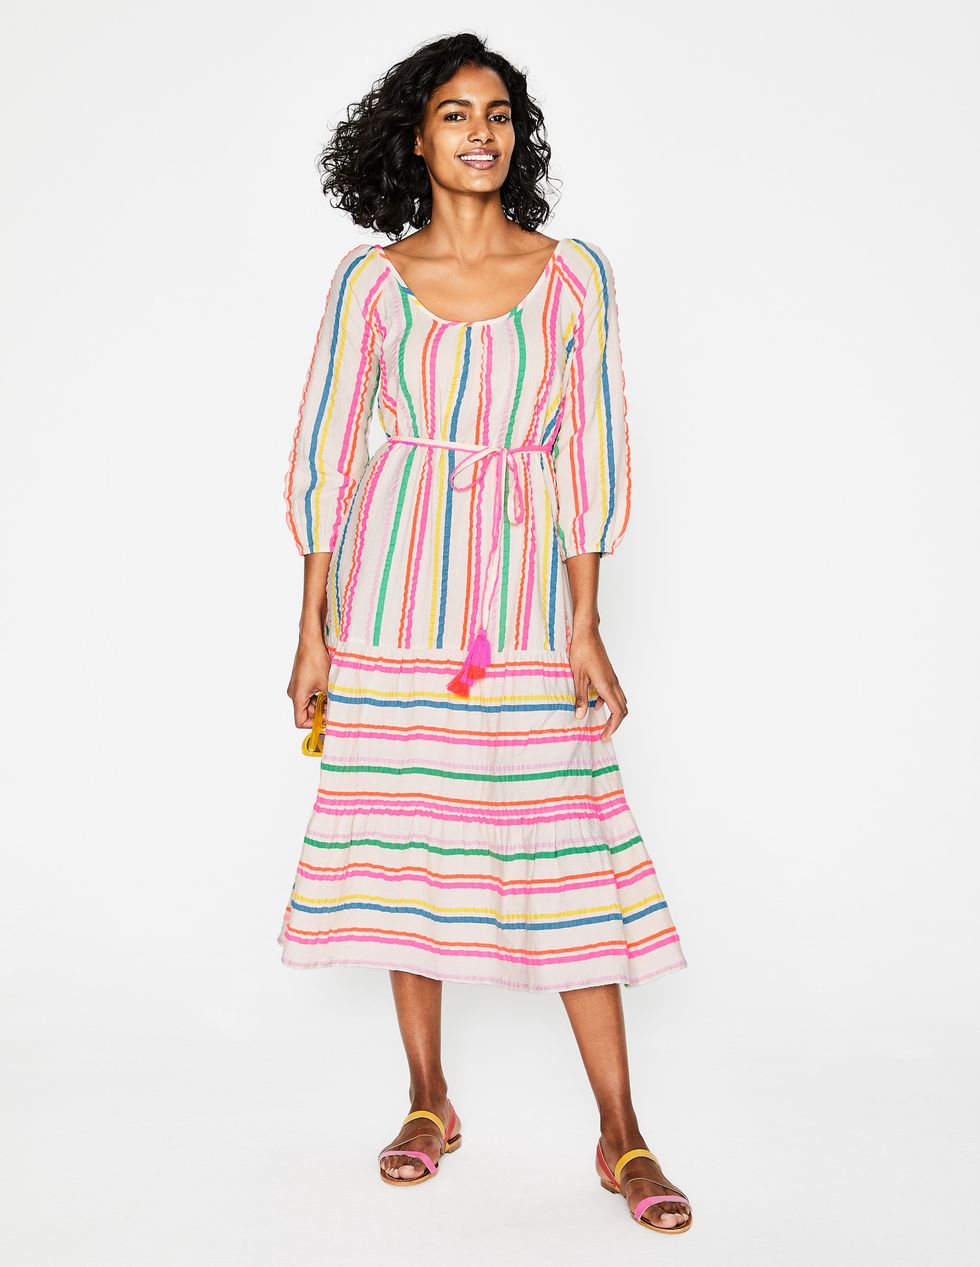 Fans can't get enough of Boden's new striped summer dress